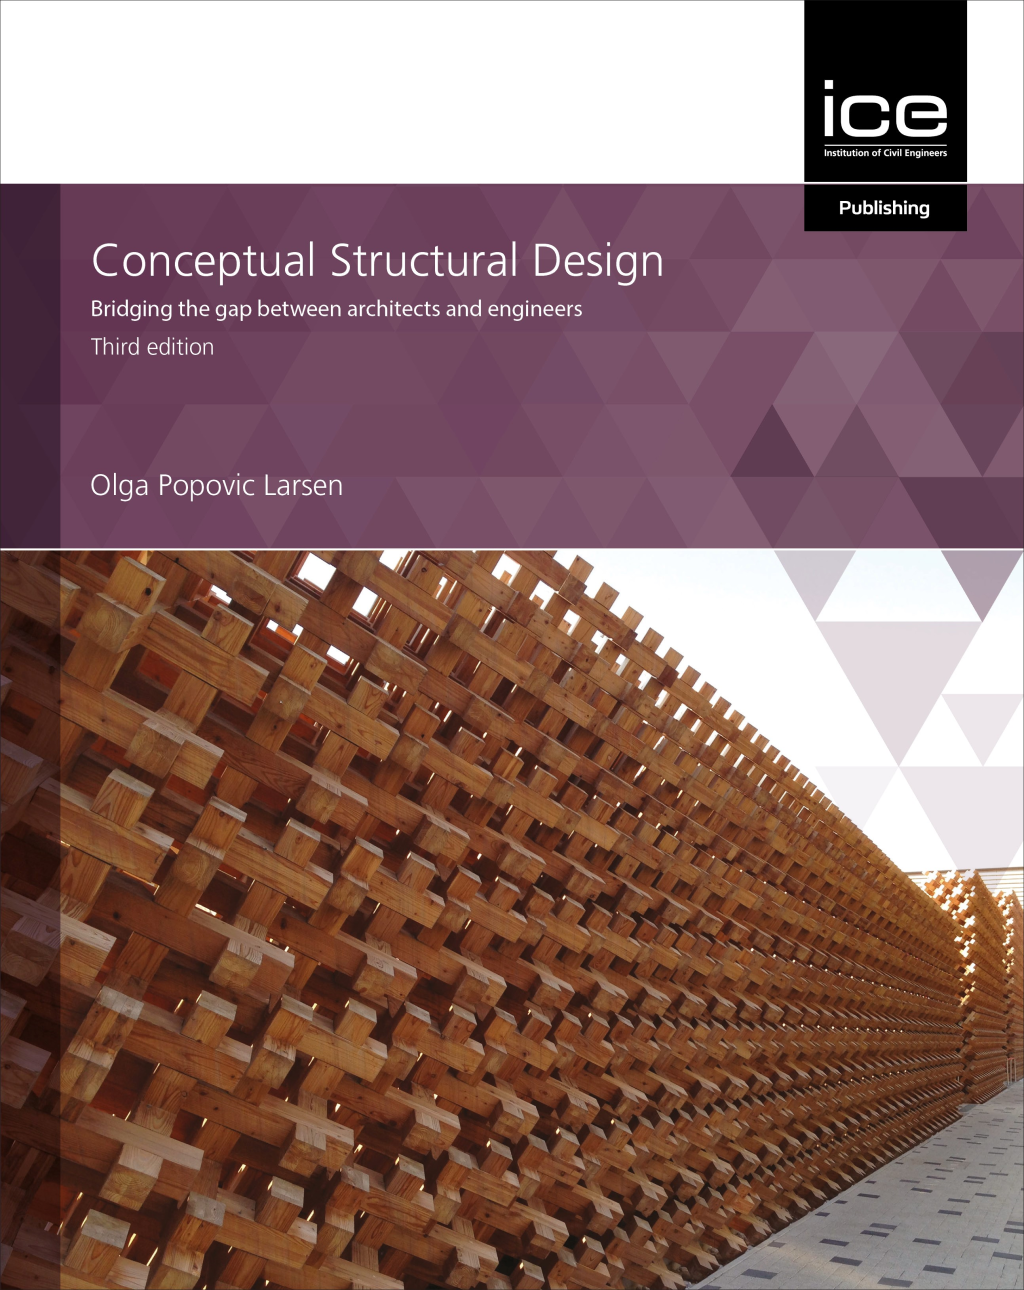 Conceptual Structural Design, Third edition: Bridging the gap between architects and engineers